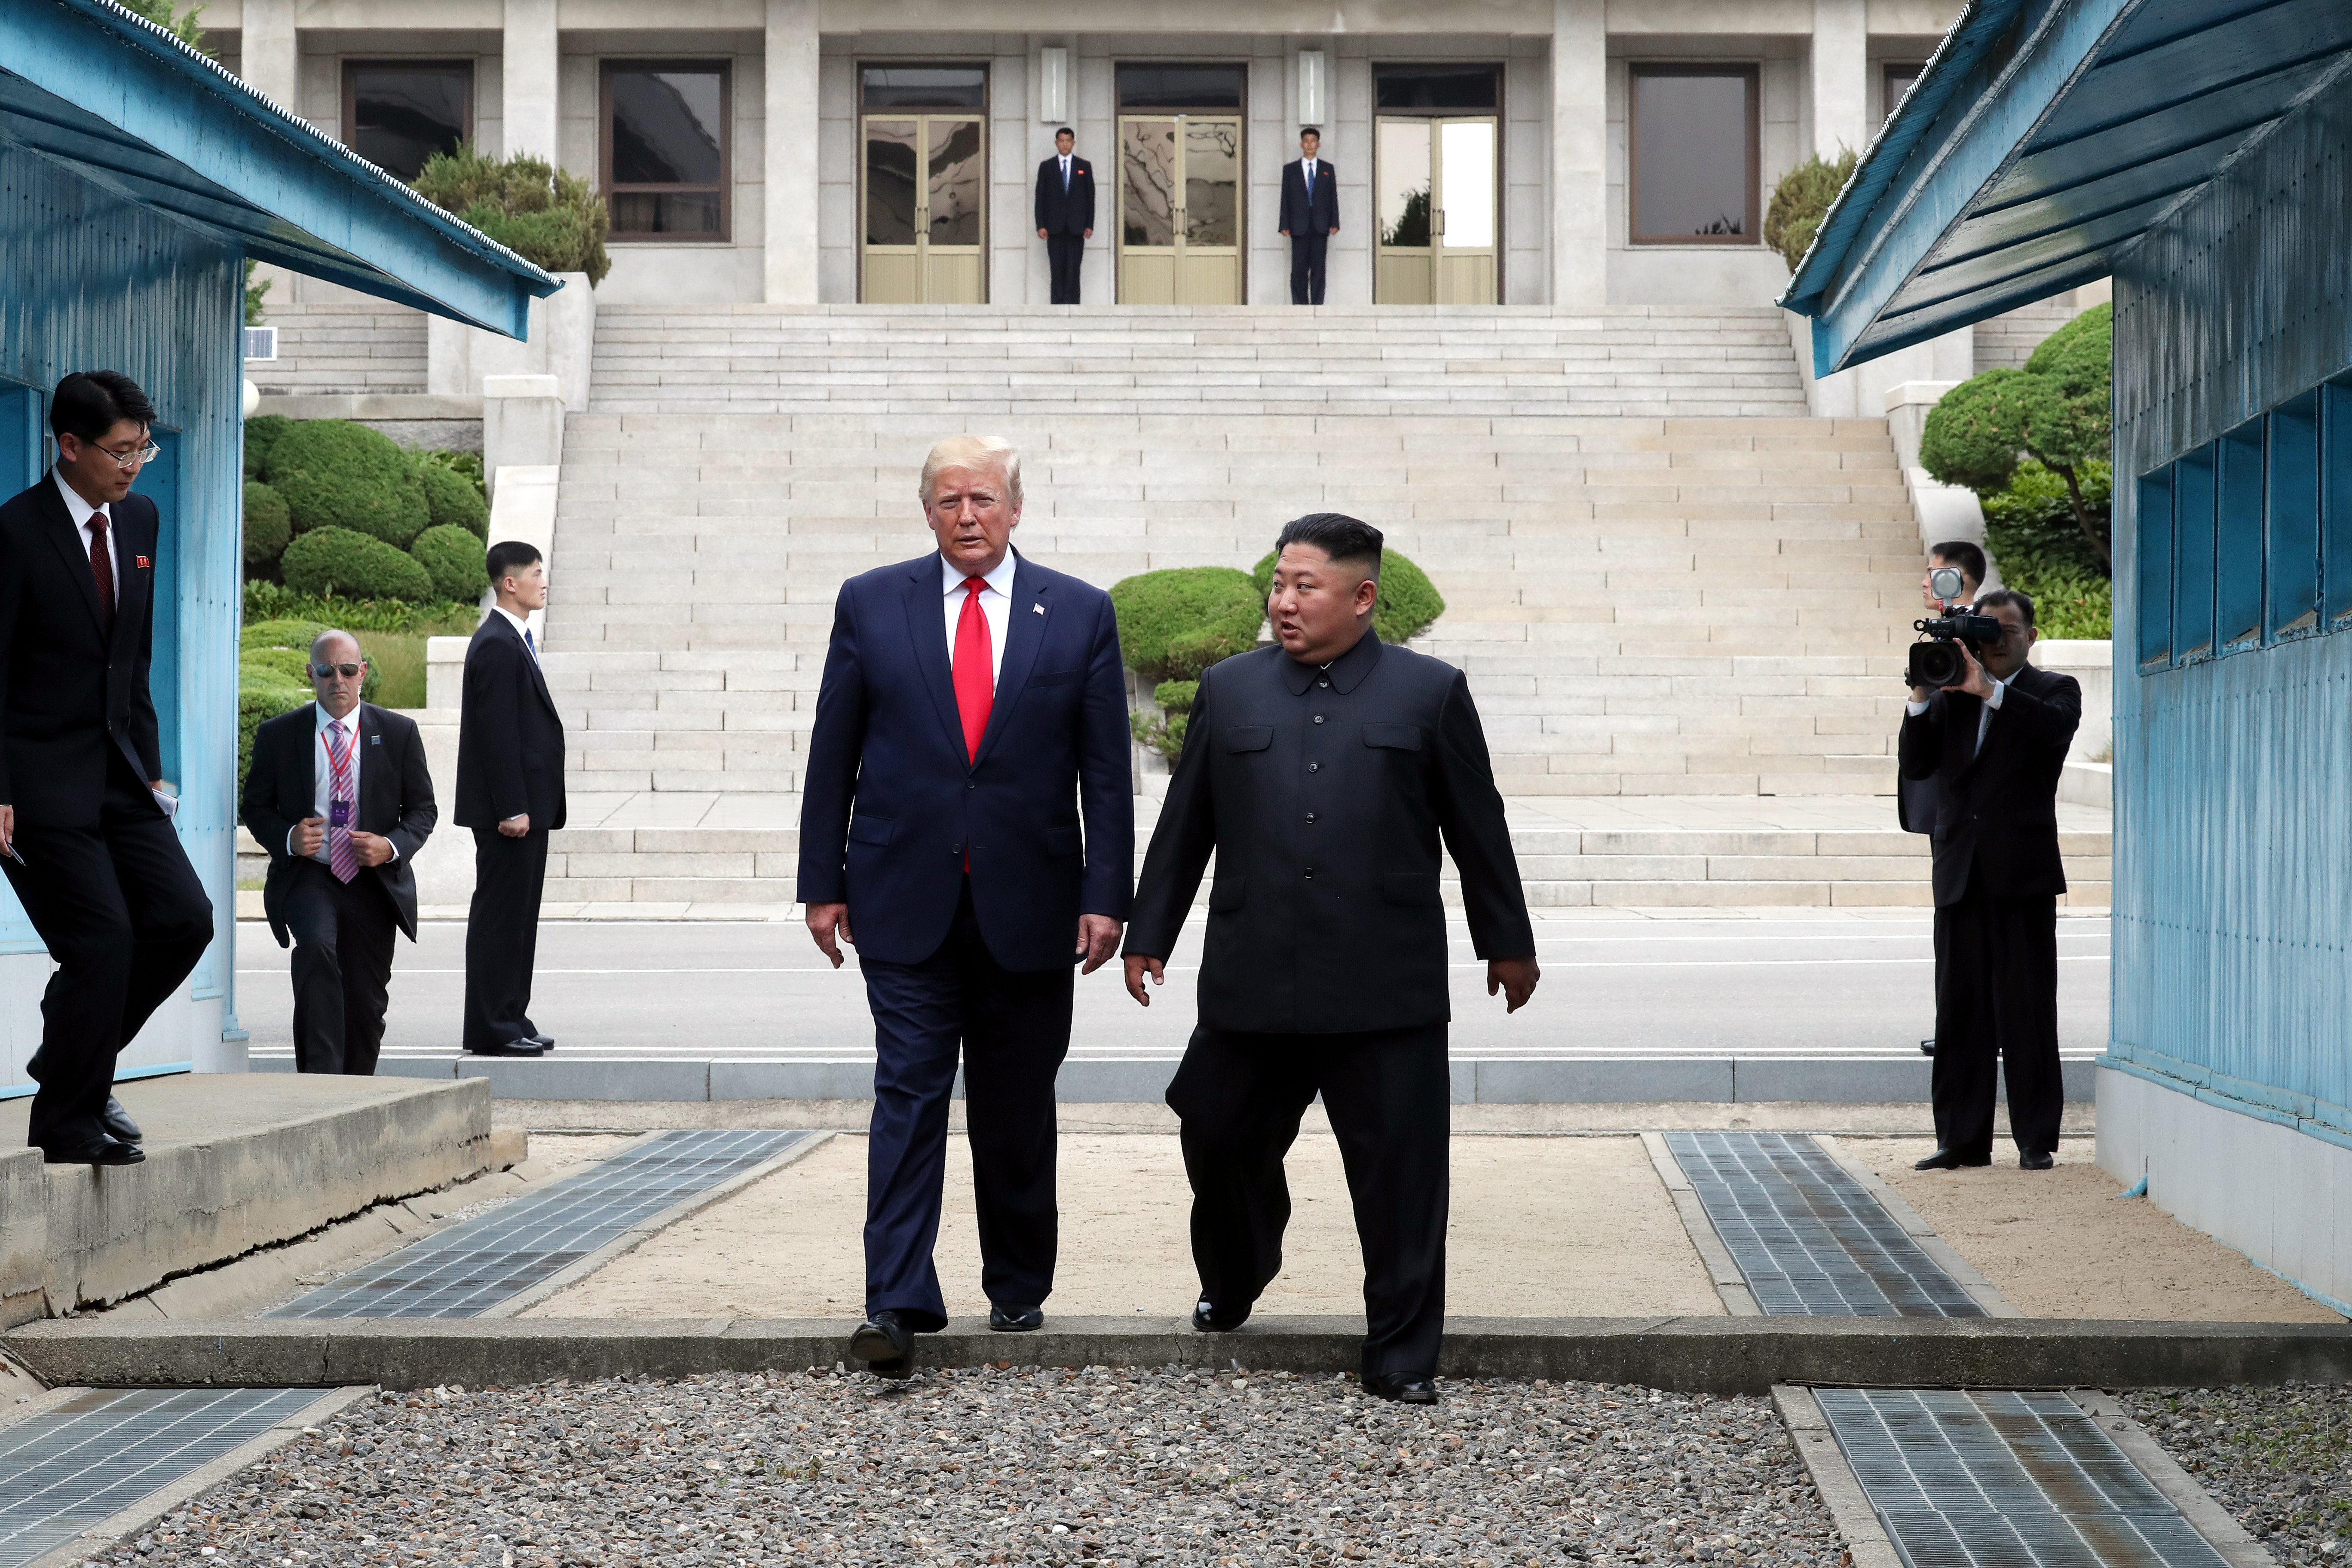 Donald Trump and Kim Jong-un at the Korean demilitarized zone | Photo: Getty Images